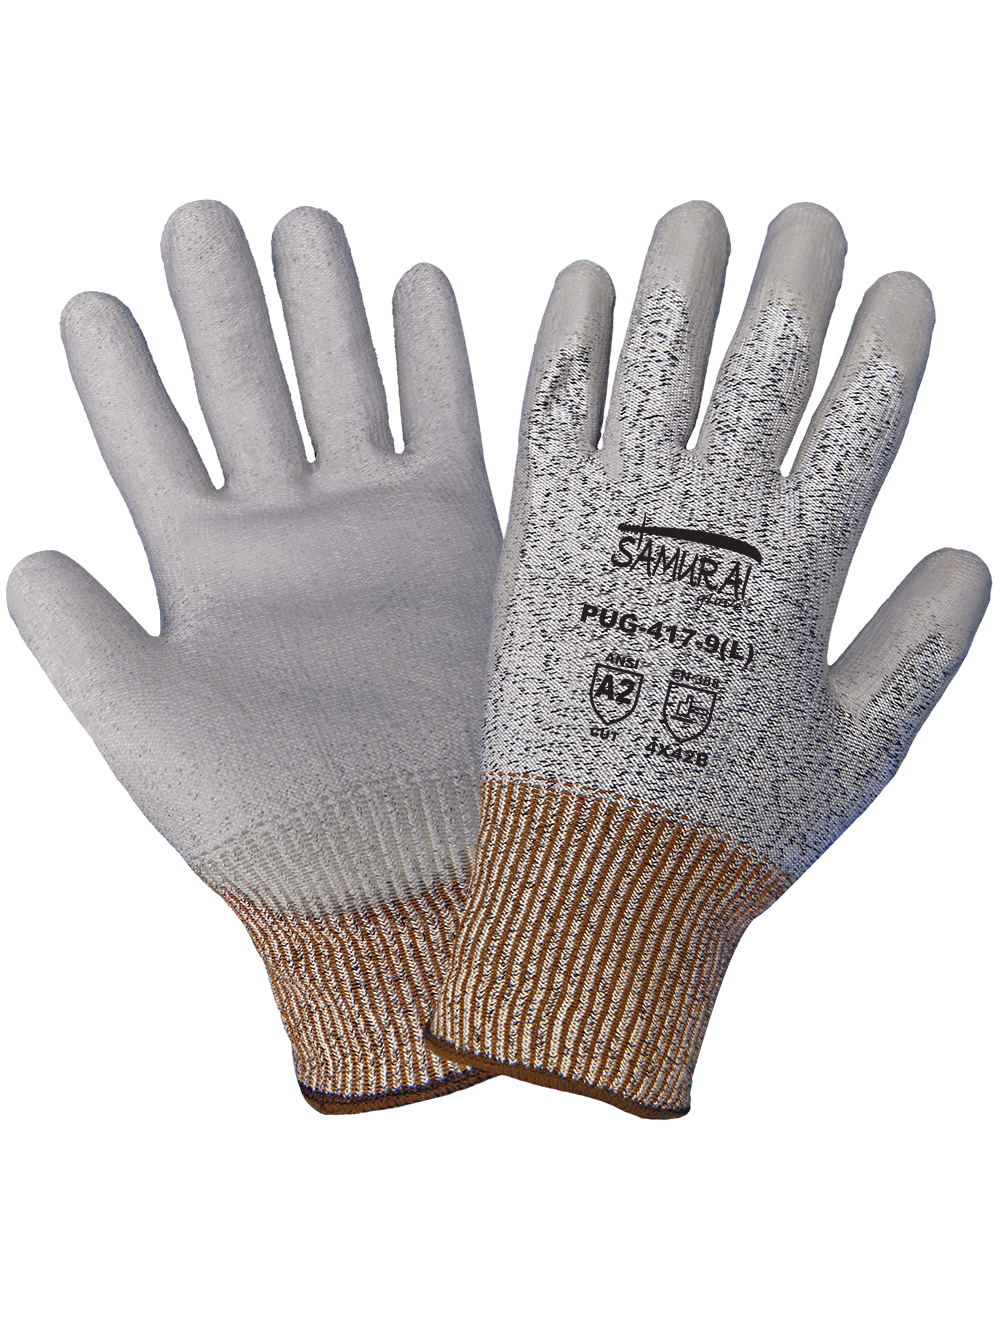 Global Glove and Safety Hand Protection, Eye Protection, Cooling  Protection, Heat Stress, Cut Resistant Protection Samurai Glove® Tuffalene®  UHMWPE Polyurethane-Coated Cut, Abrasion, and Puncture Resistant Gloves -  PUG-417